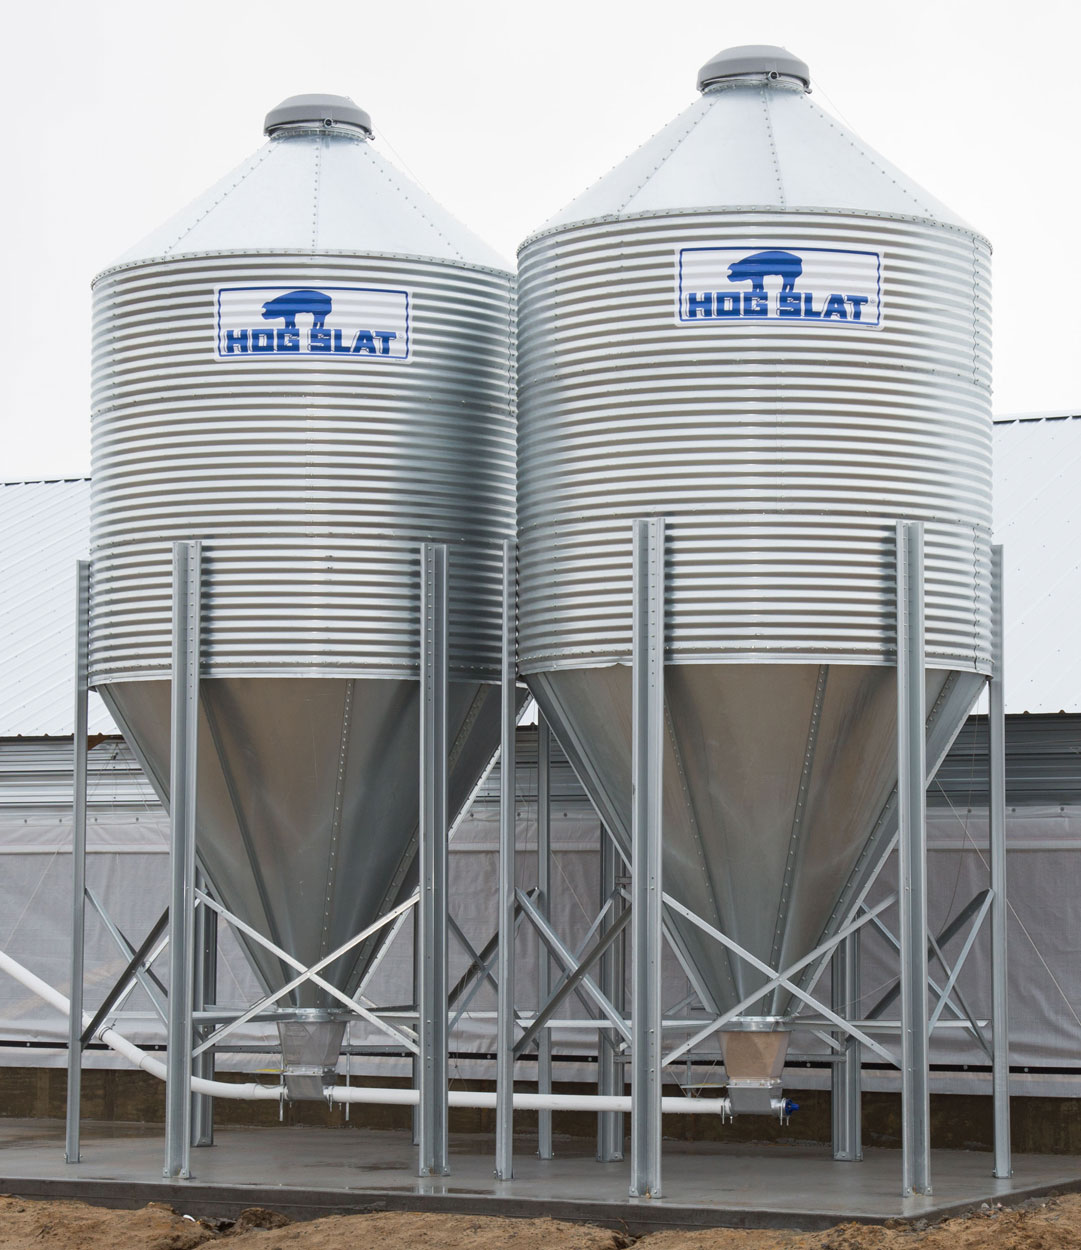 Hog Slat feed bins are available in many different sizes and capacities to provide storage solutions for your operation.